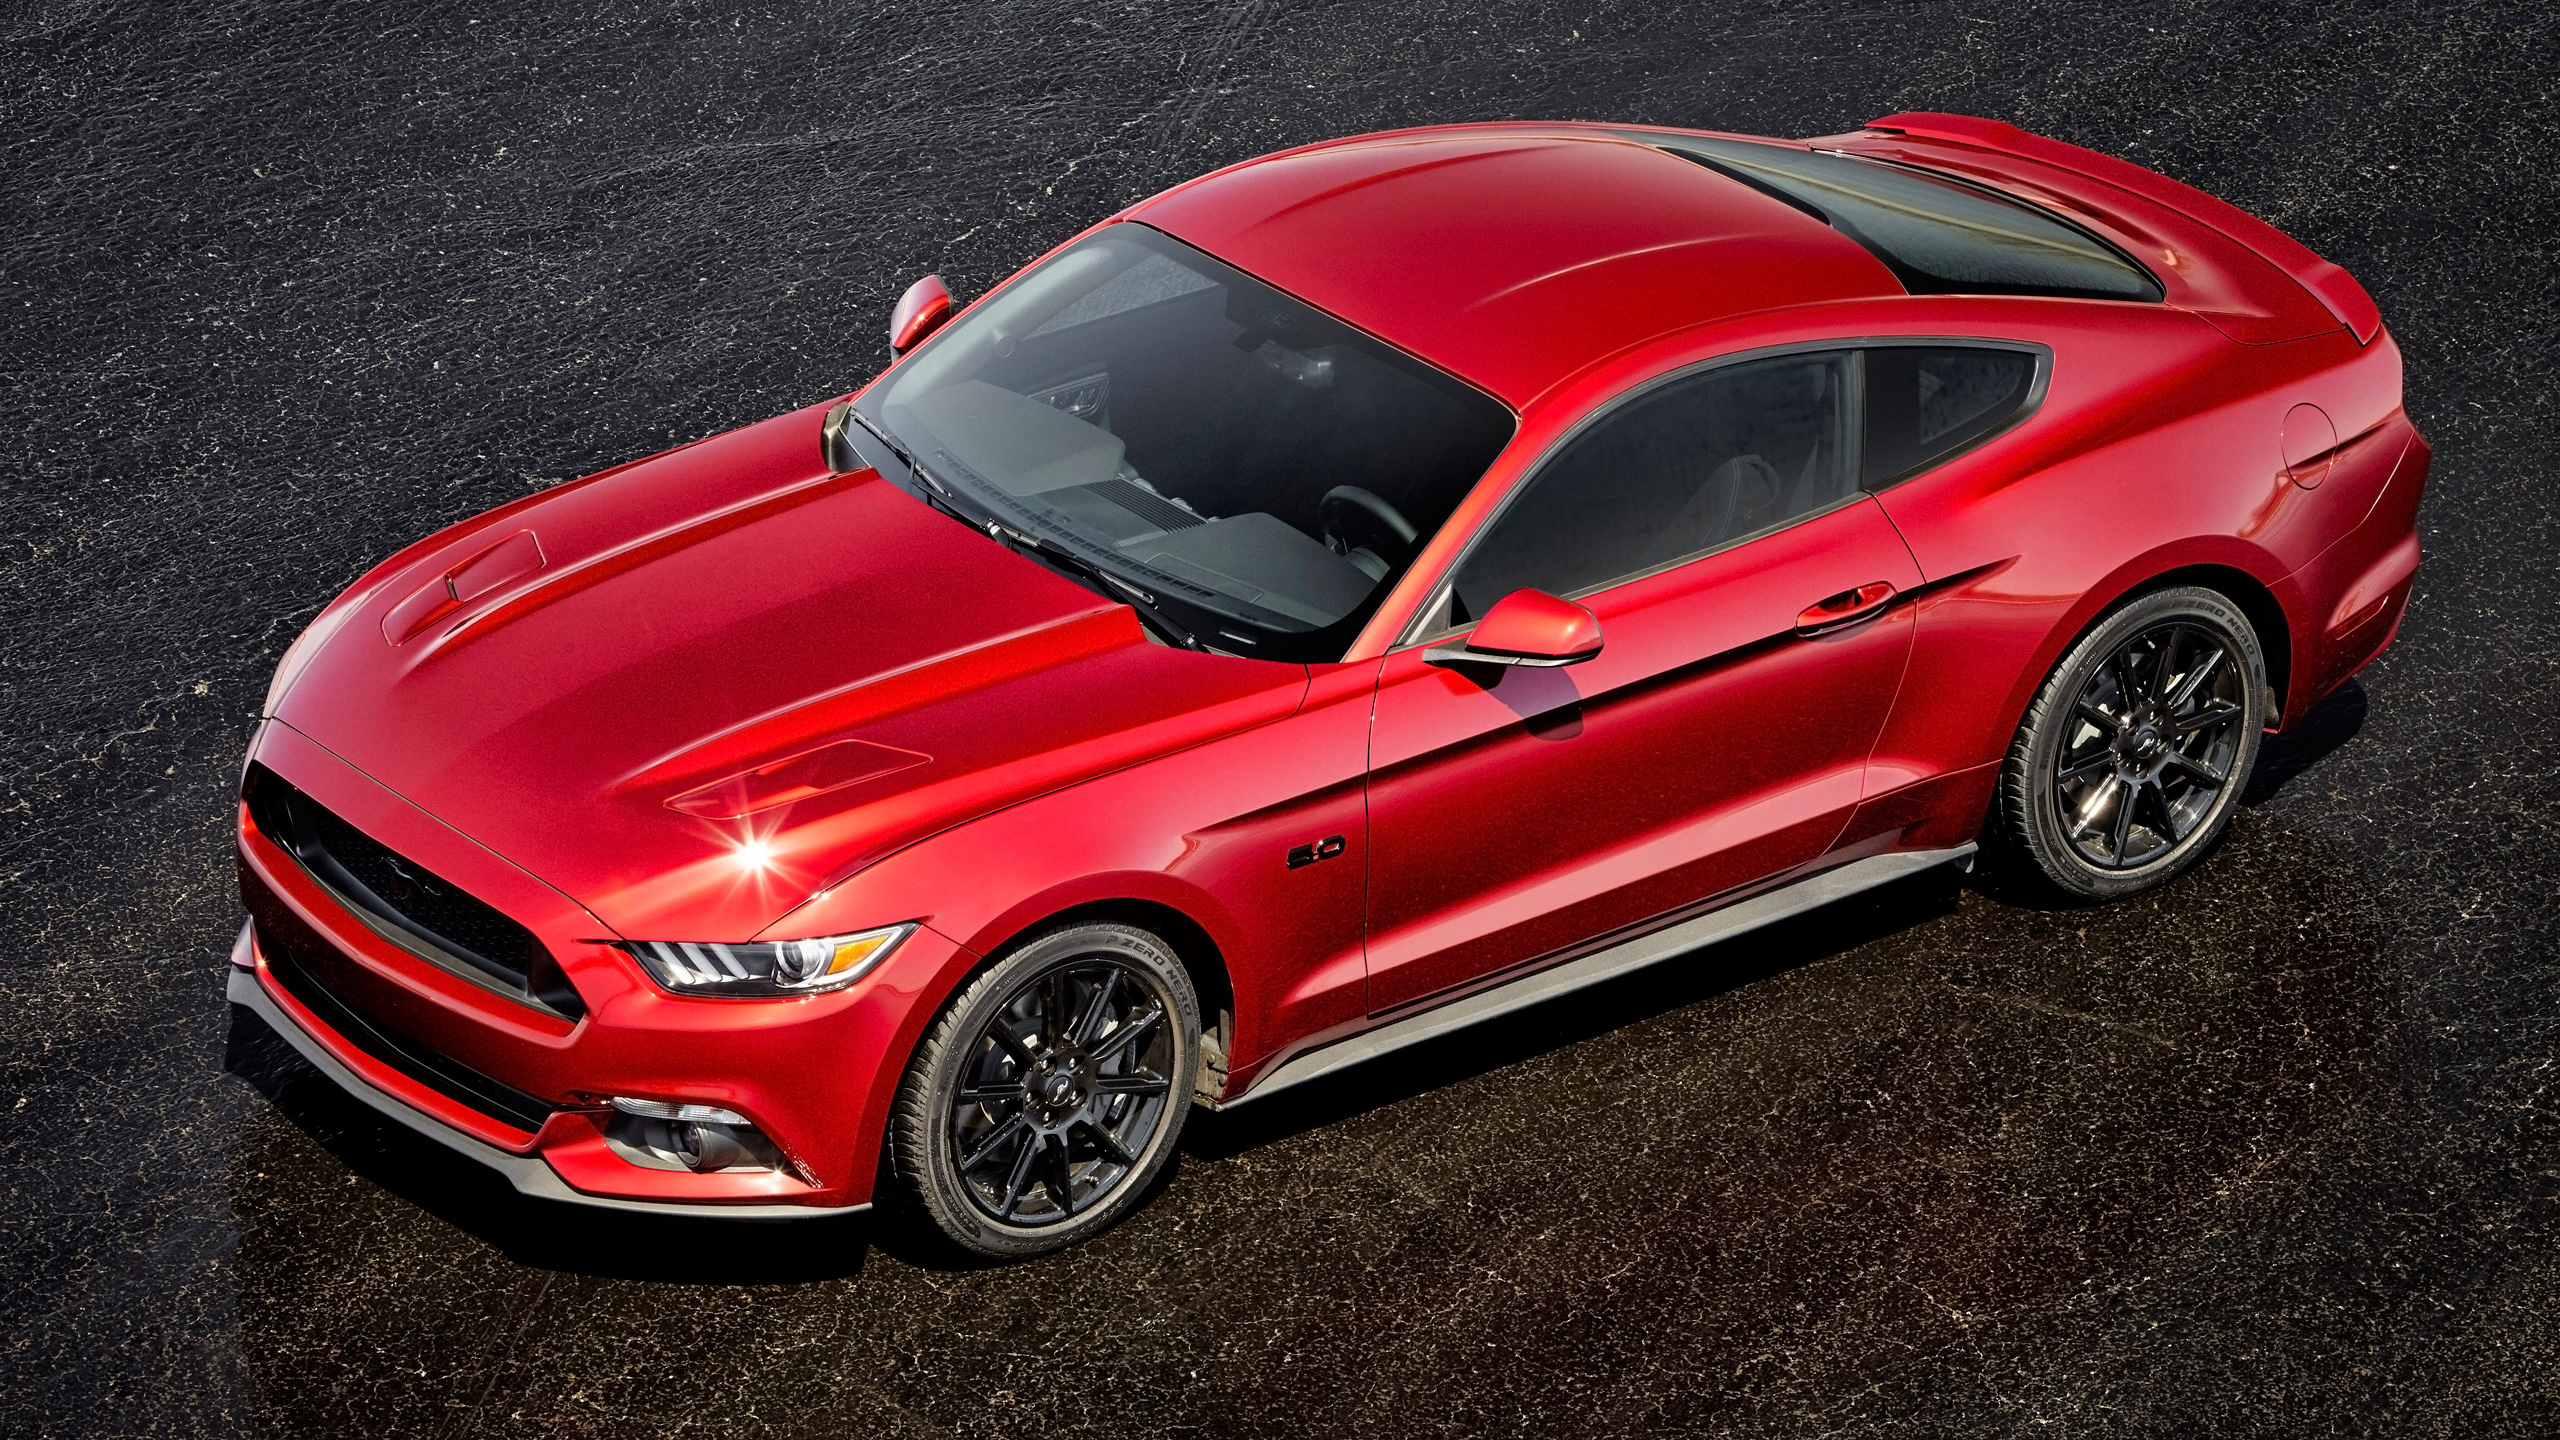 2016 Ford Mustang GT Wallpaper | HD Car Wallpapers | ID #5336